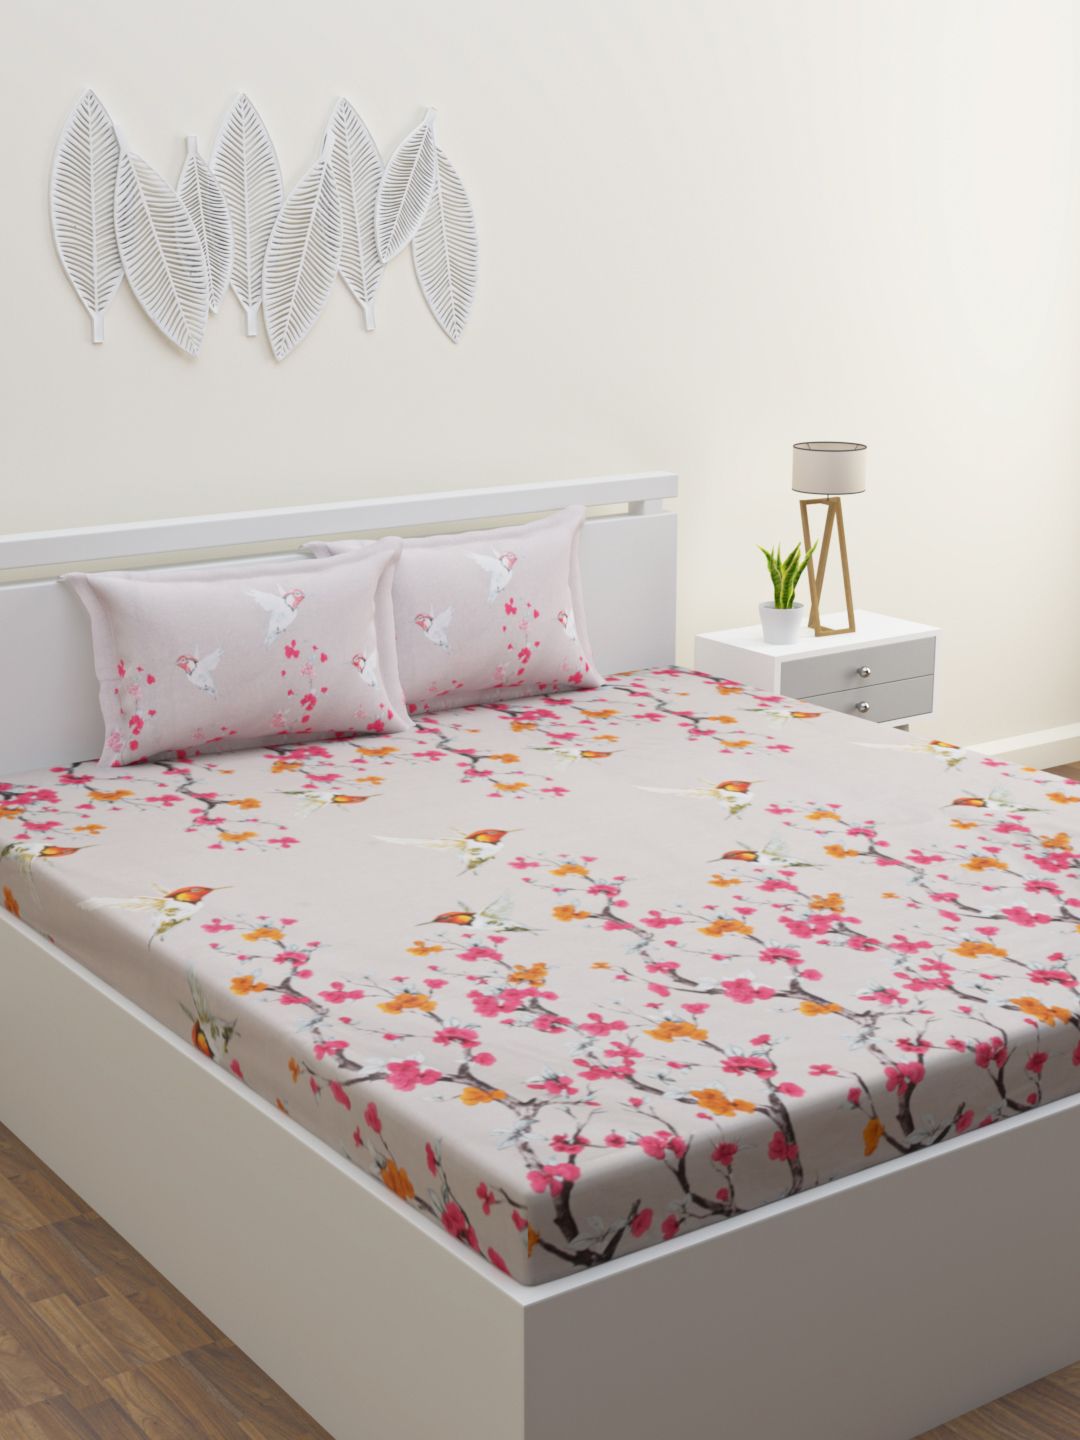 ROMEE Peach-Coloured & Grey Floral 160 TC Cotton King Bedsheet with 2 Pillow Covers Price in India